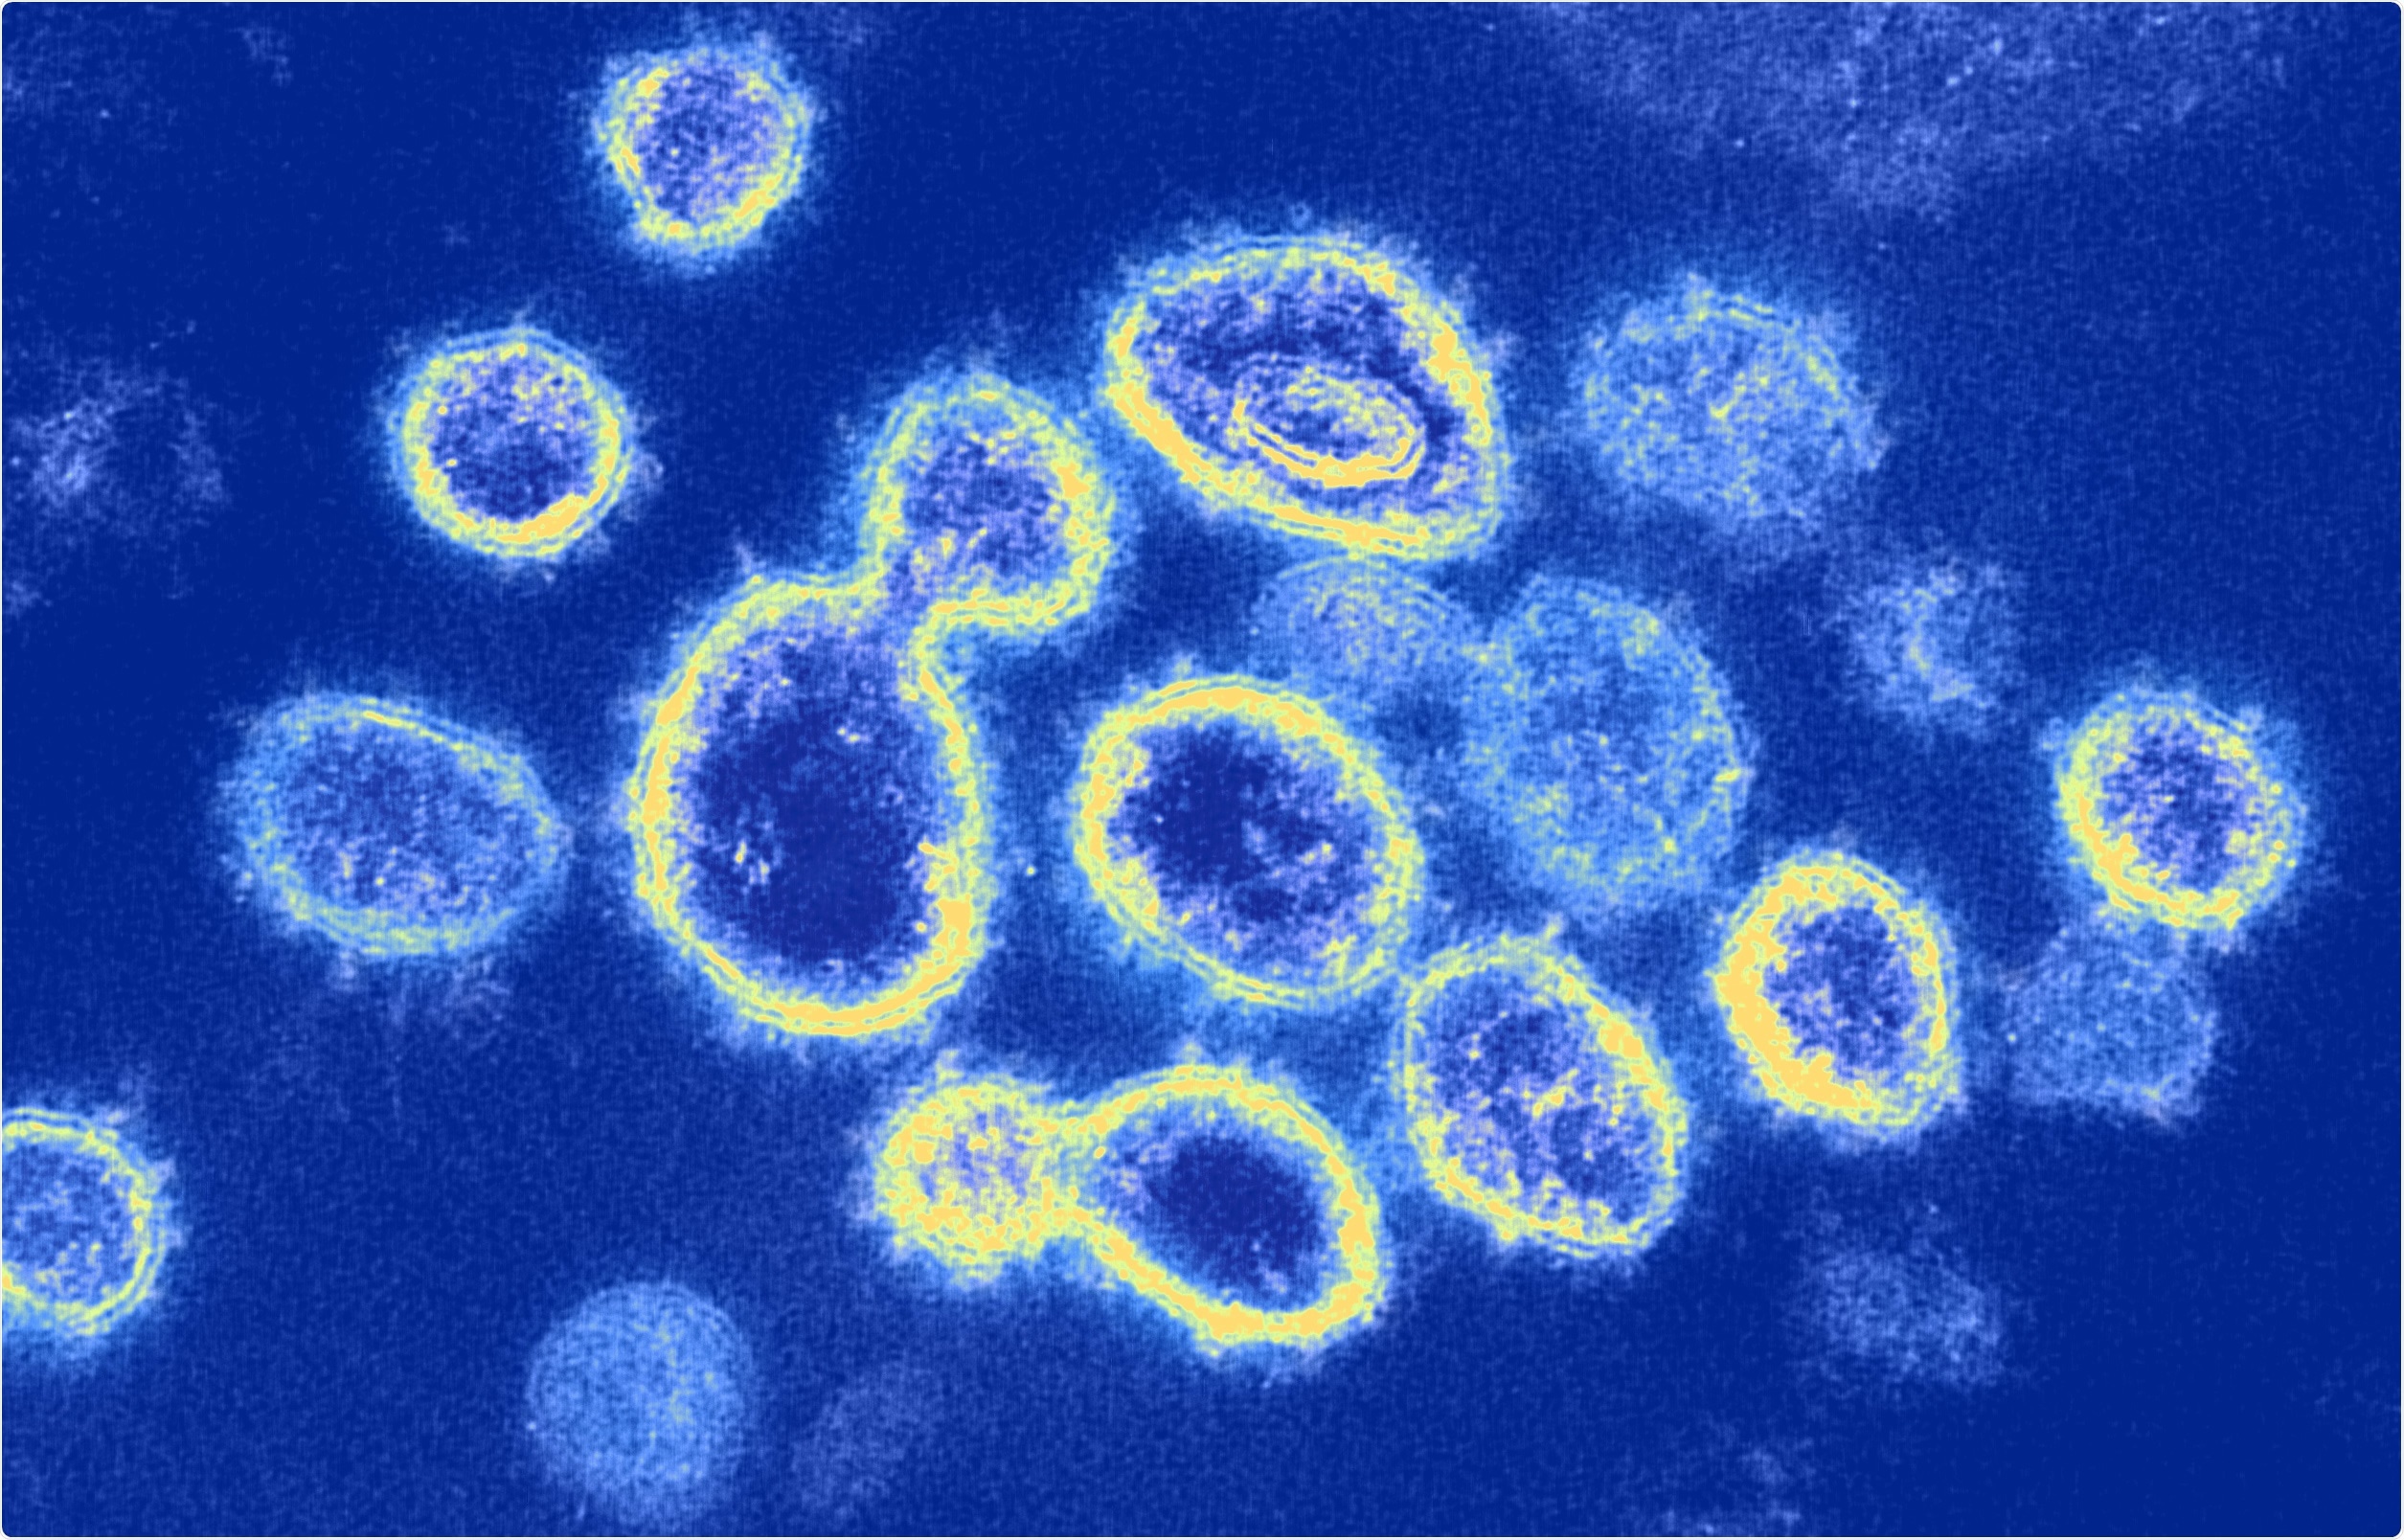 Study: Prophylactic protection against respiratory viruses conferred by a prototype live attenuated influenza virus vaccine. Image Credit: NIAID